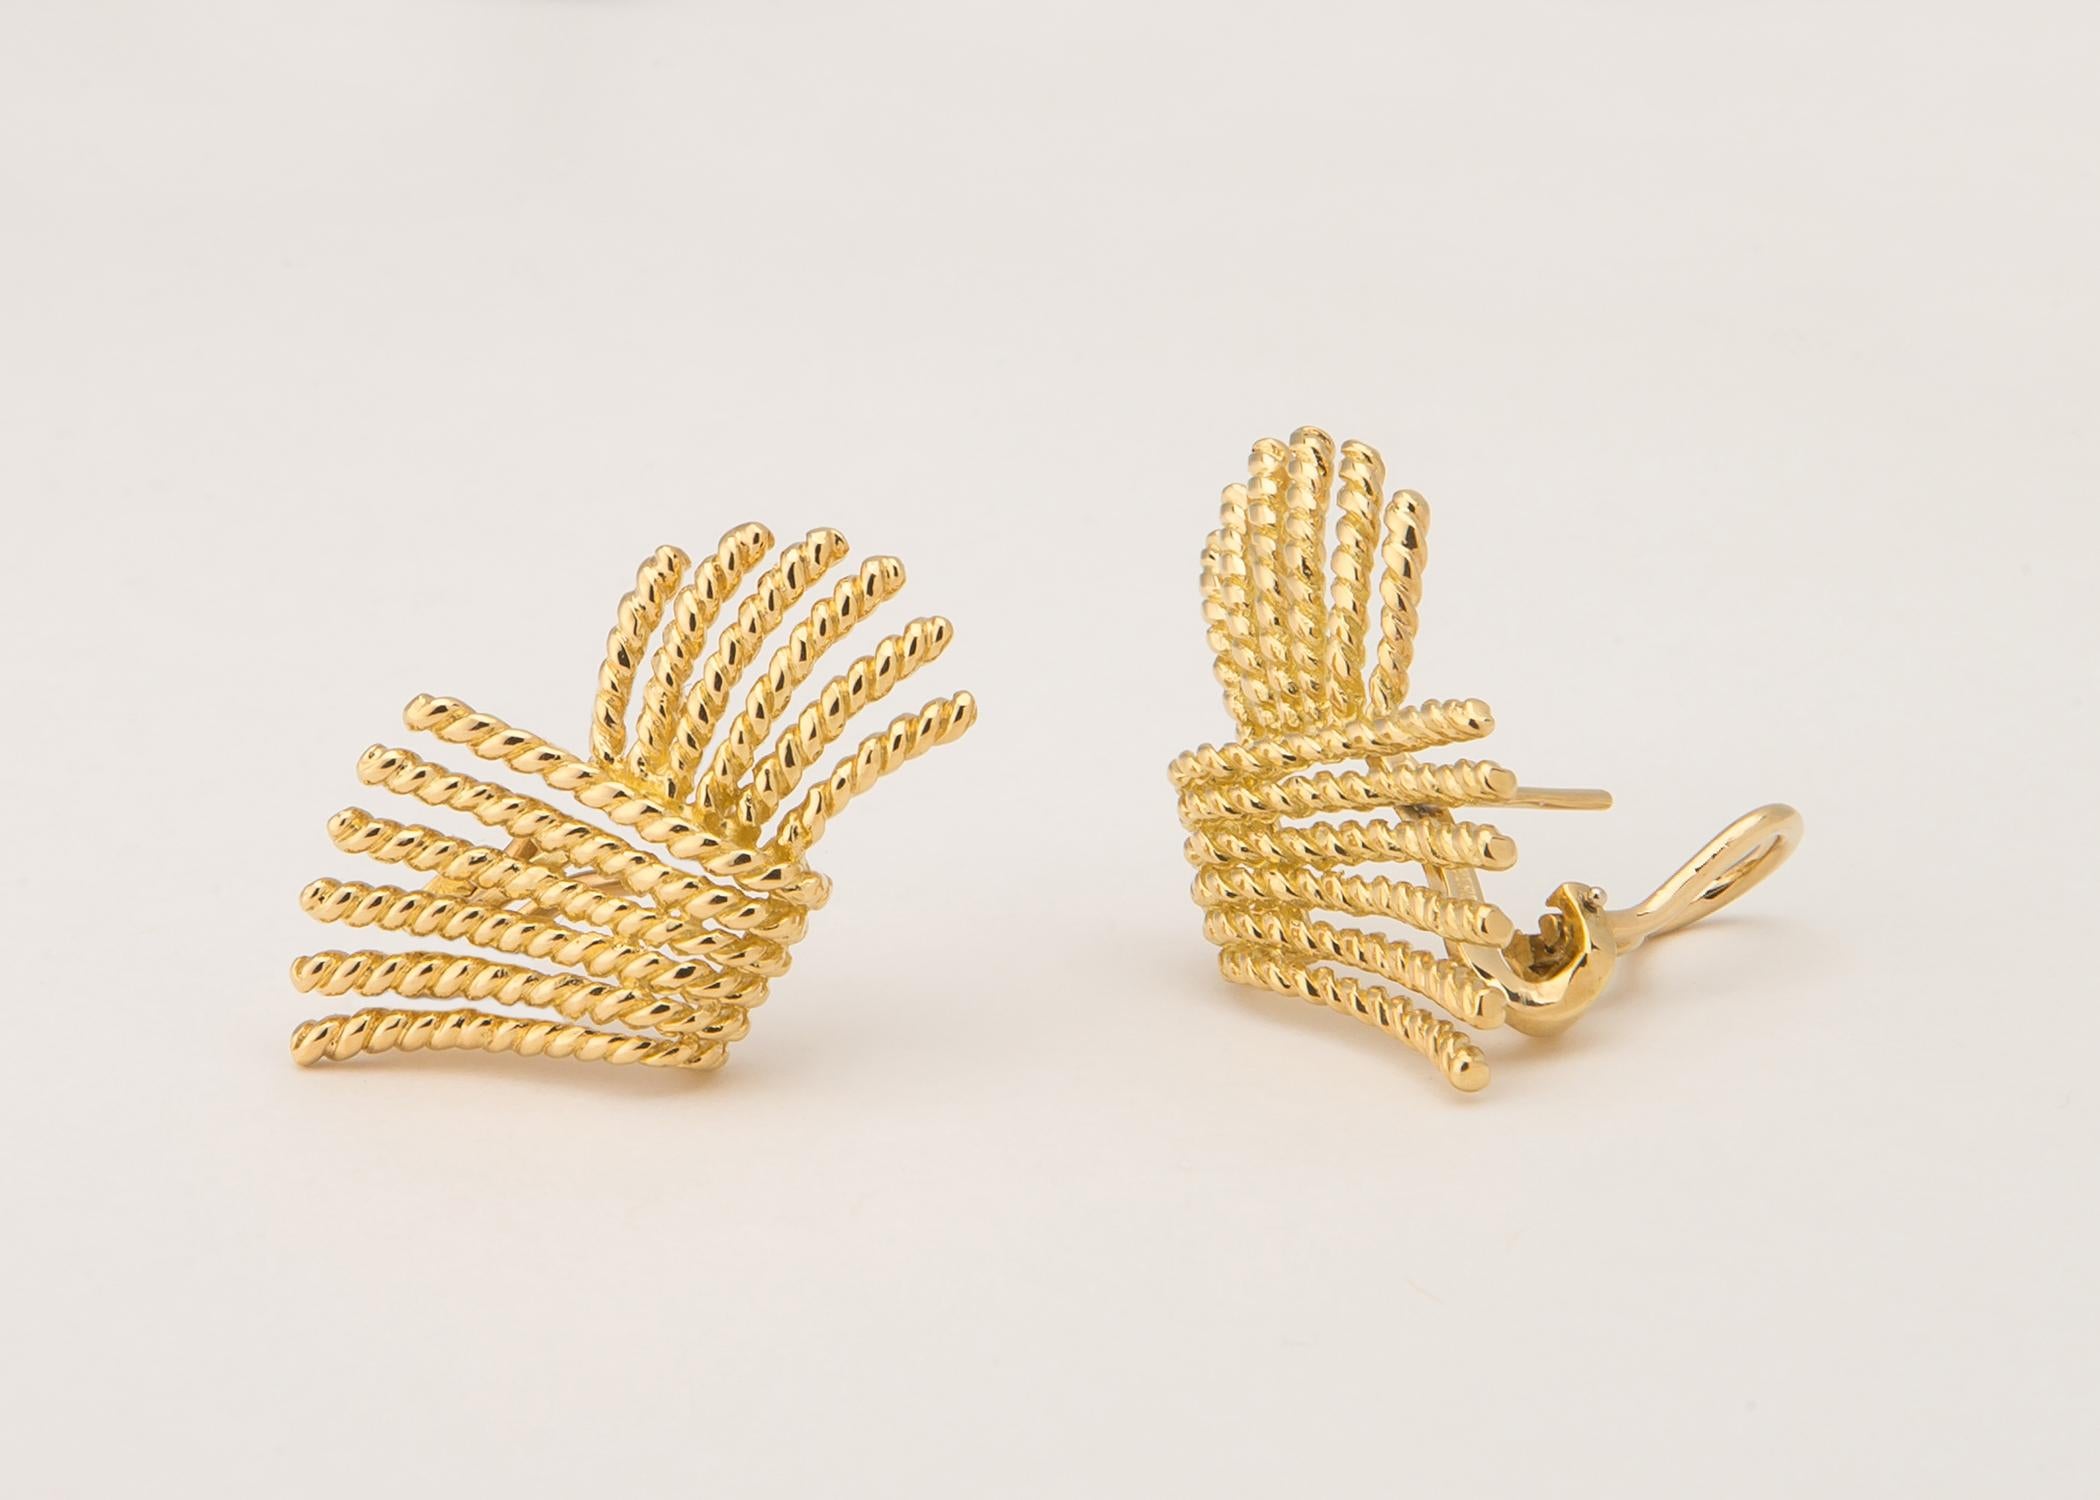 The acclaimed French jeweler Jean Schlumberger joined Tiffany & Co. in the 1950's His creations are considered works of art and in many prominent collections. His gold rope earring offers a wearable shape and wonderful fit. 1 1/4 inches in length.